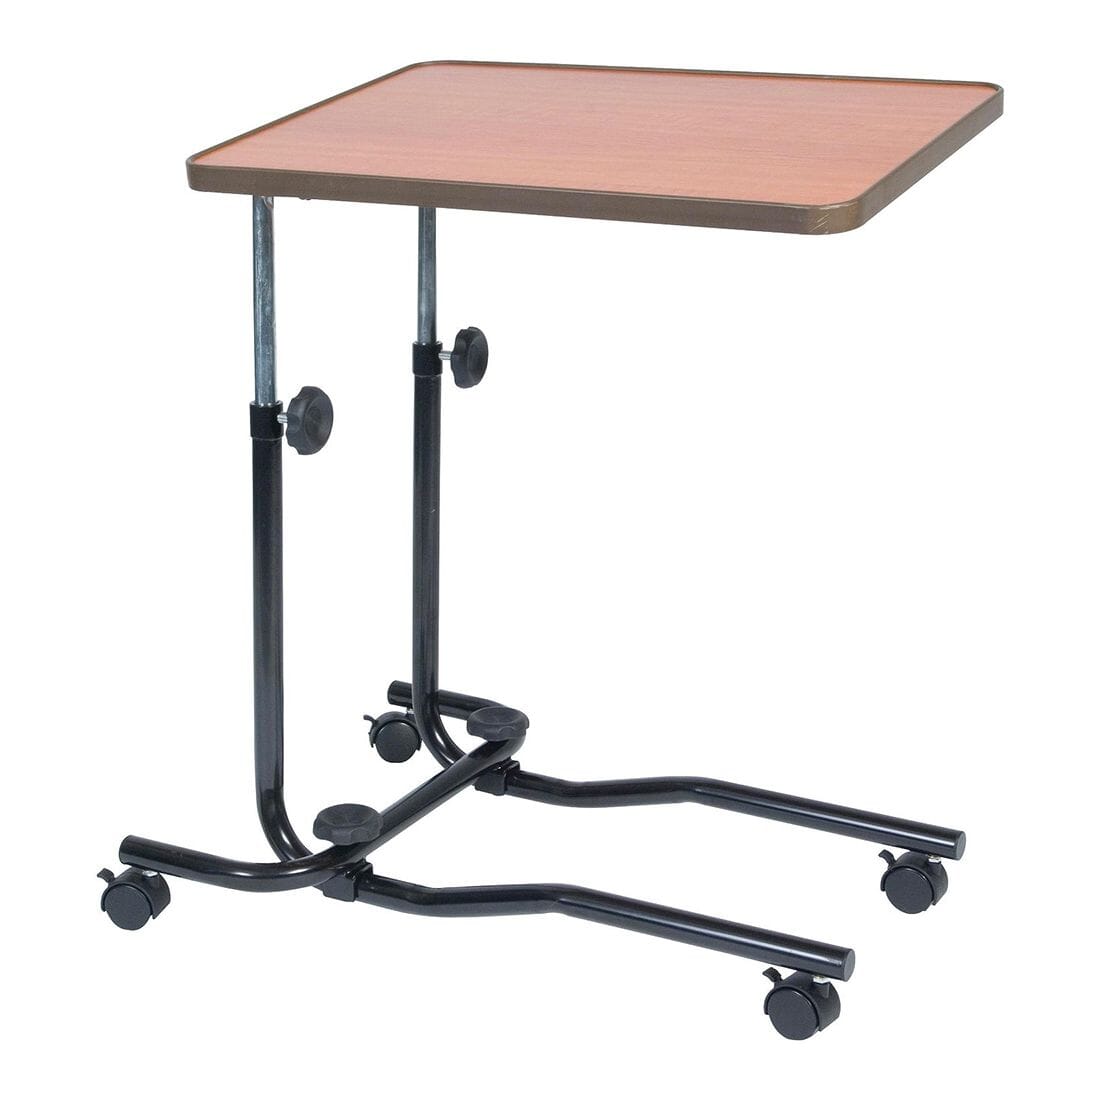 View Adjustable Bed Chair Table with Castors information